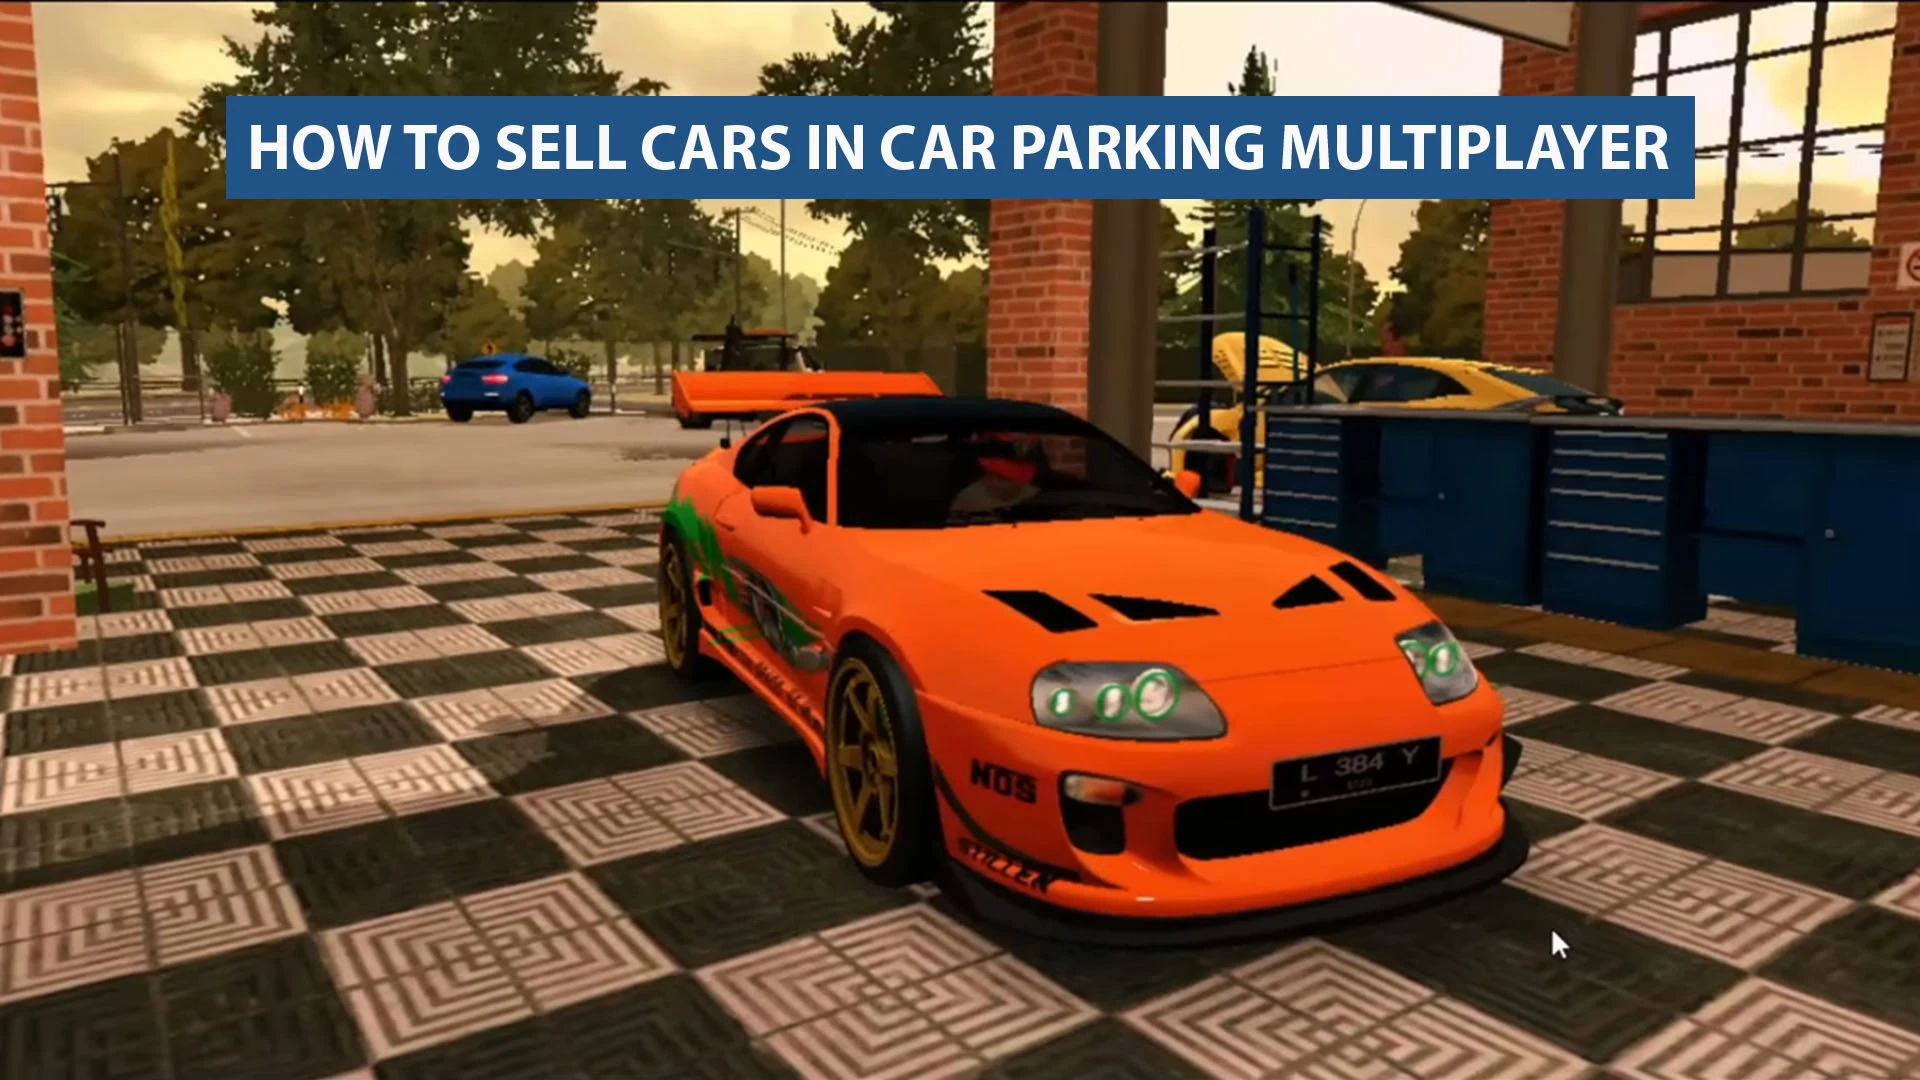 SELL CARS IN CAR PARKING MULTIPLAYER